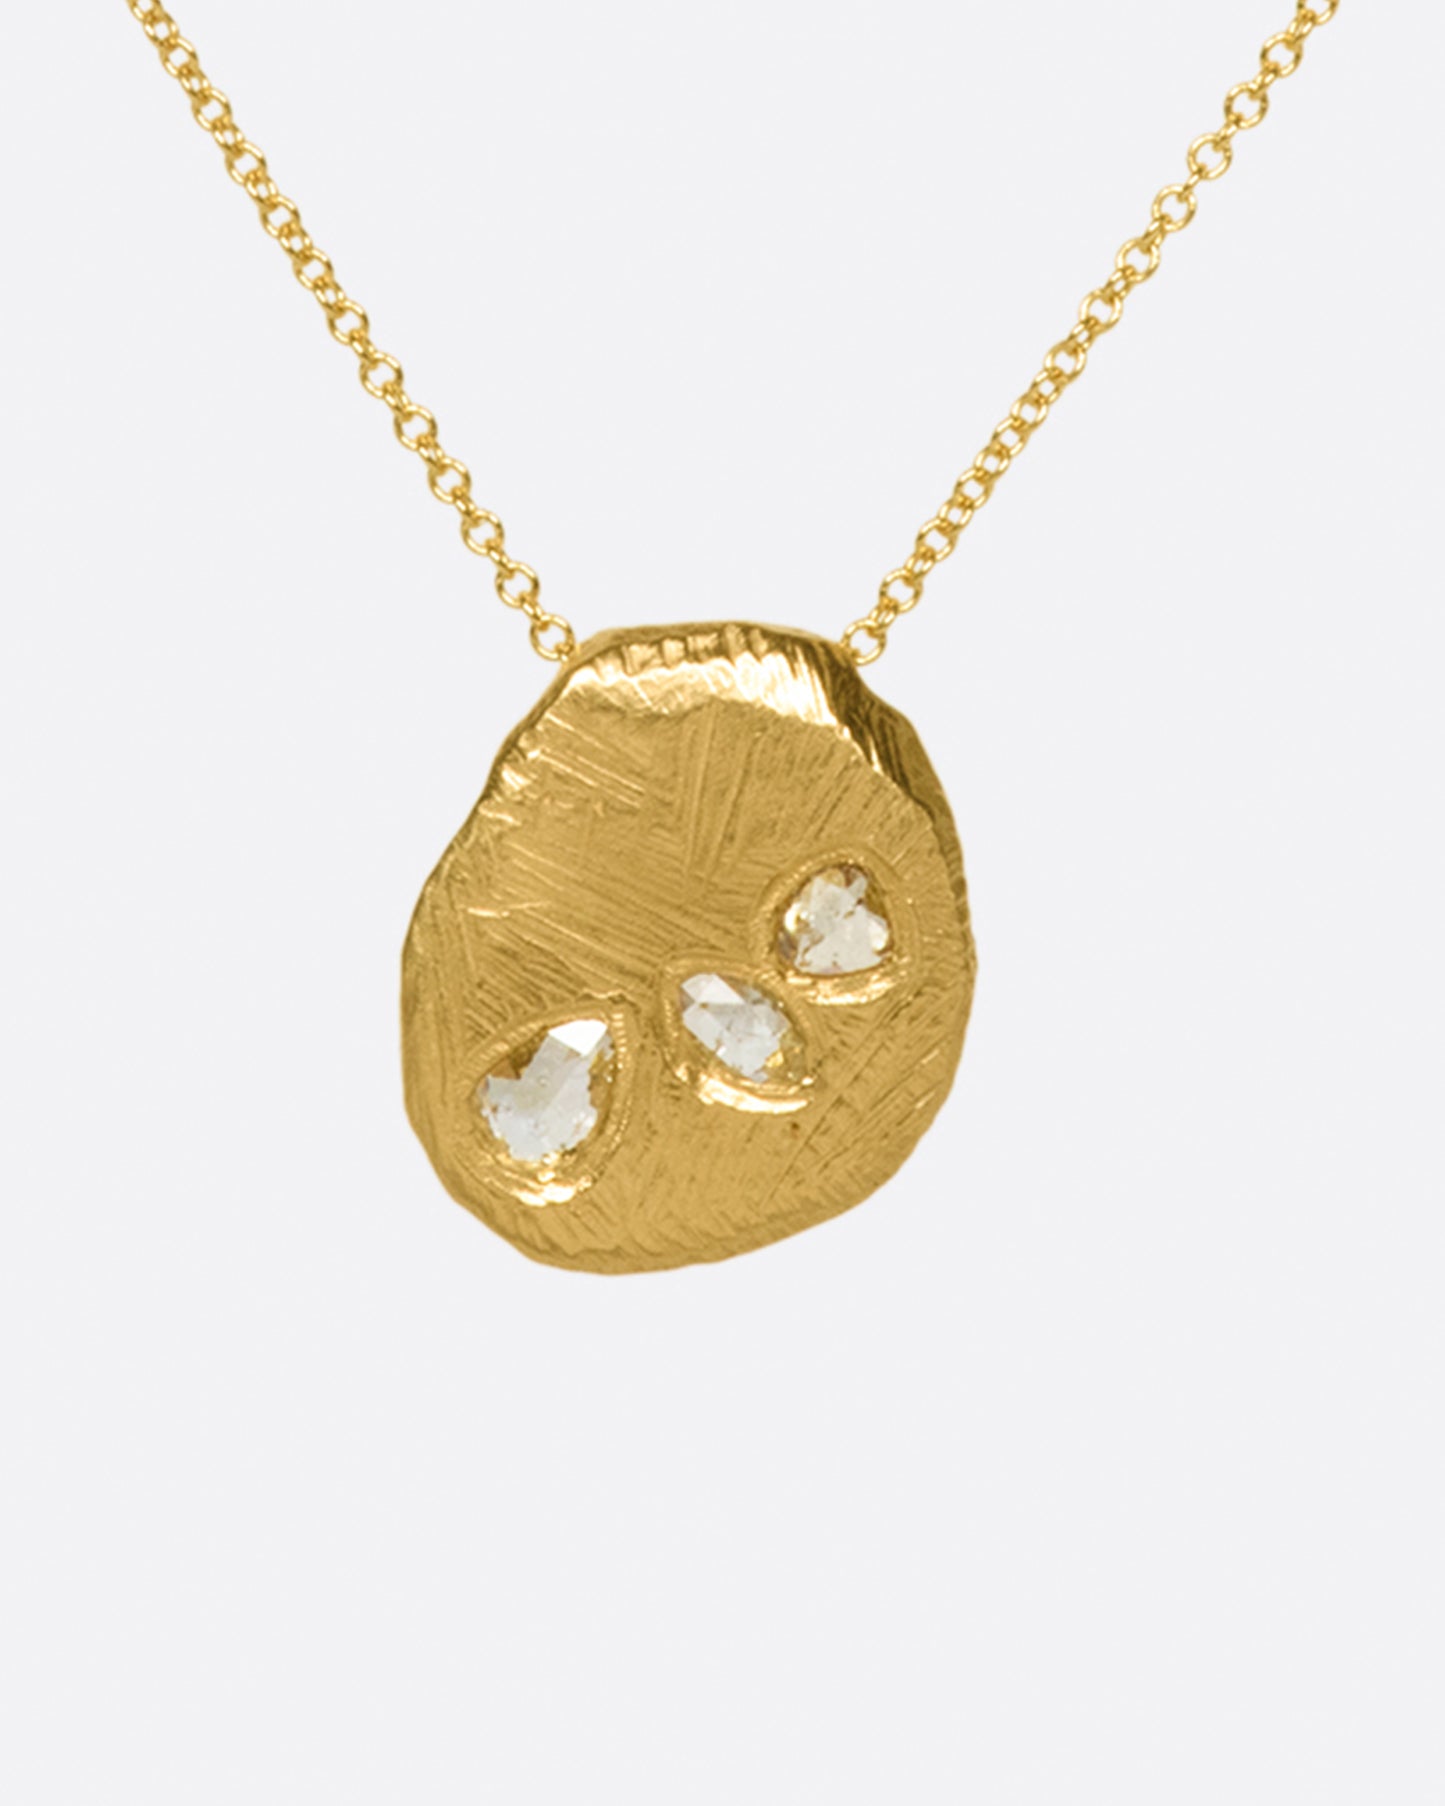 A heavy, hand carved, sliding gold pendant with three rose cut diamonds on a cable chain.